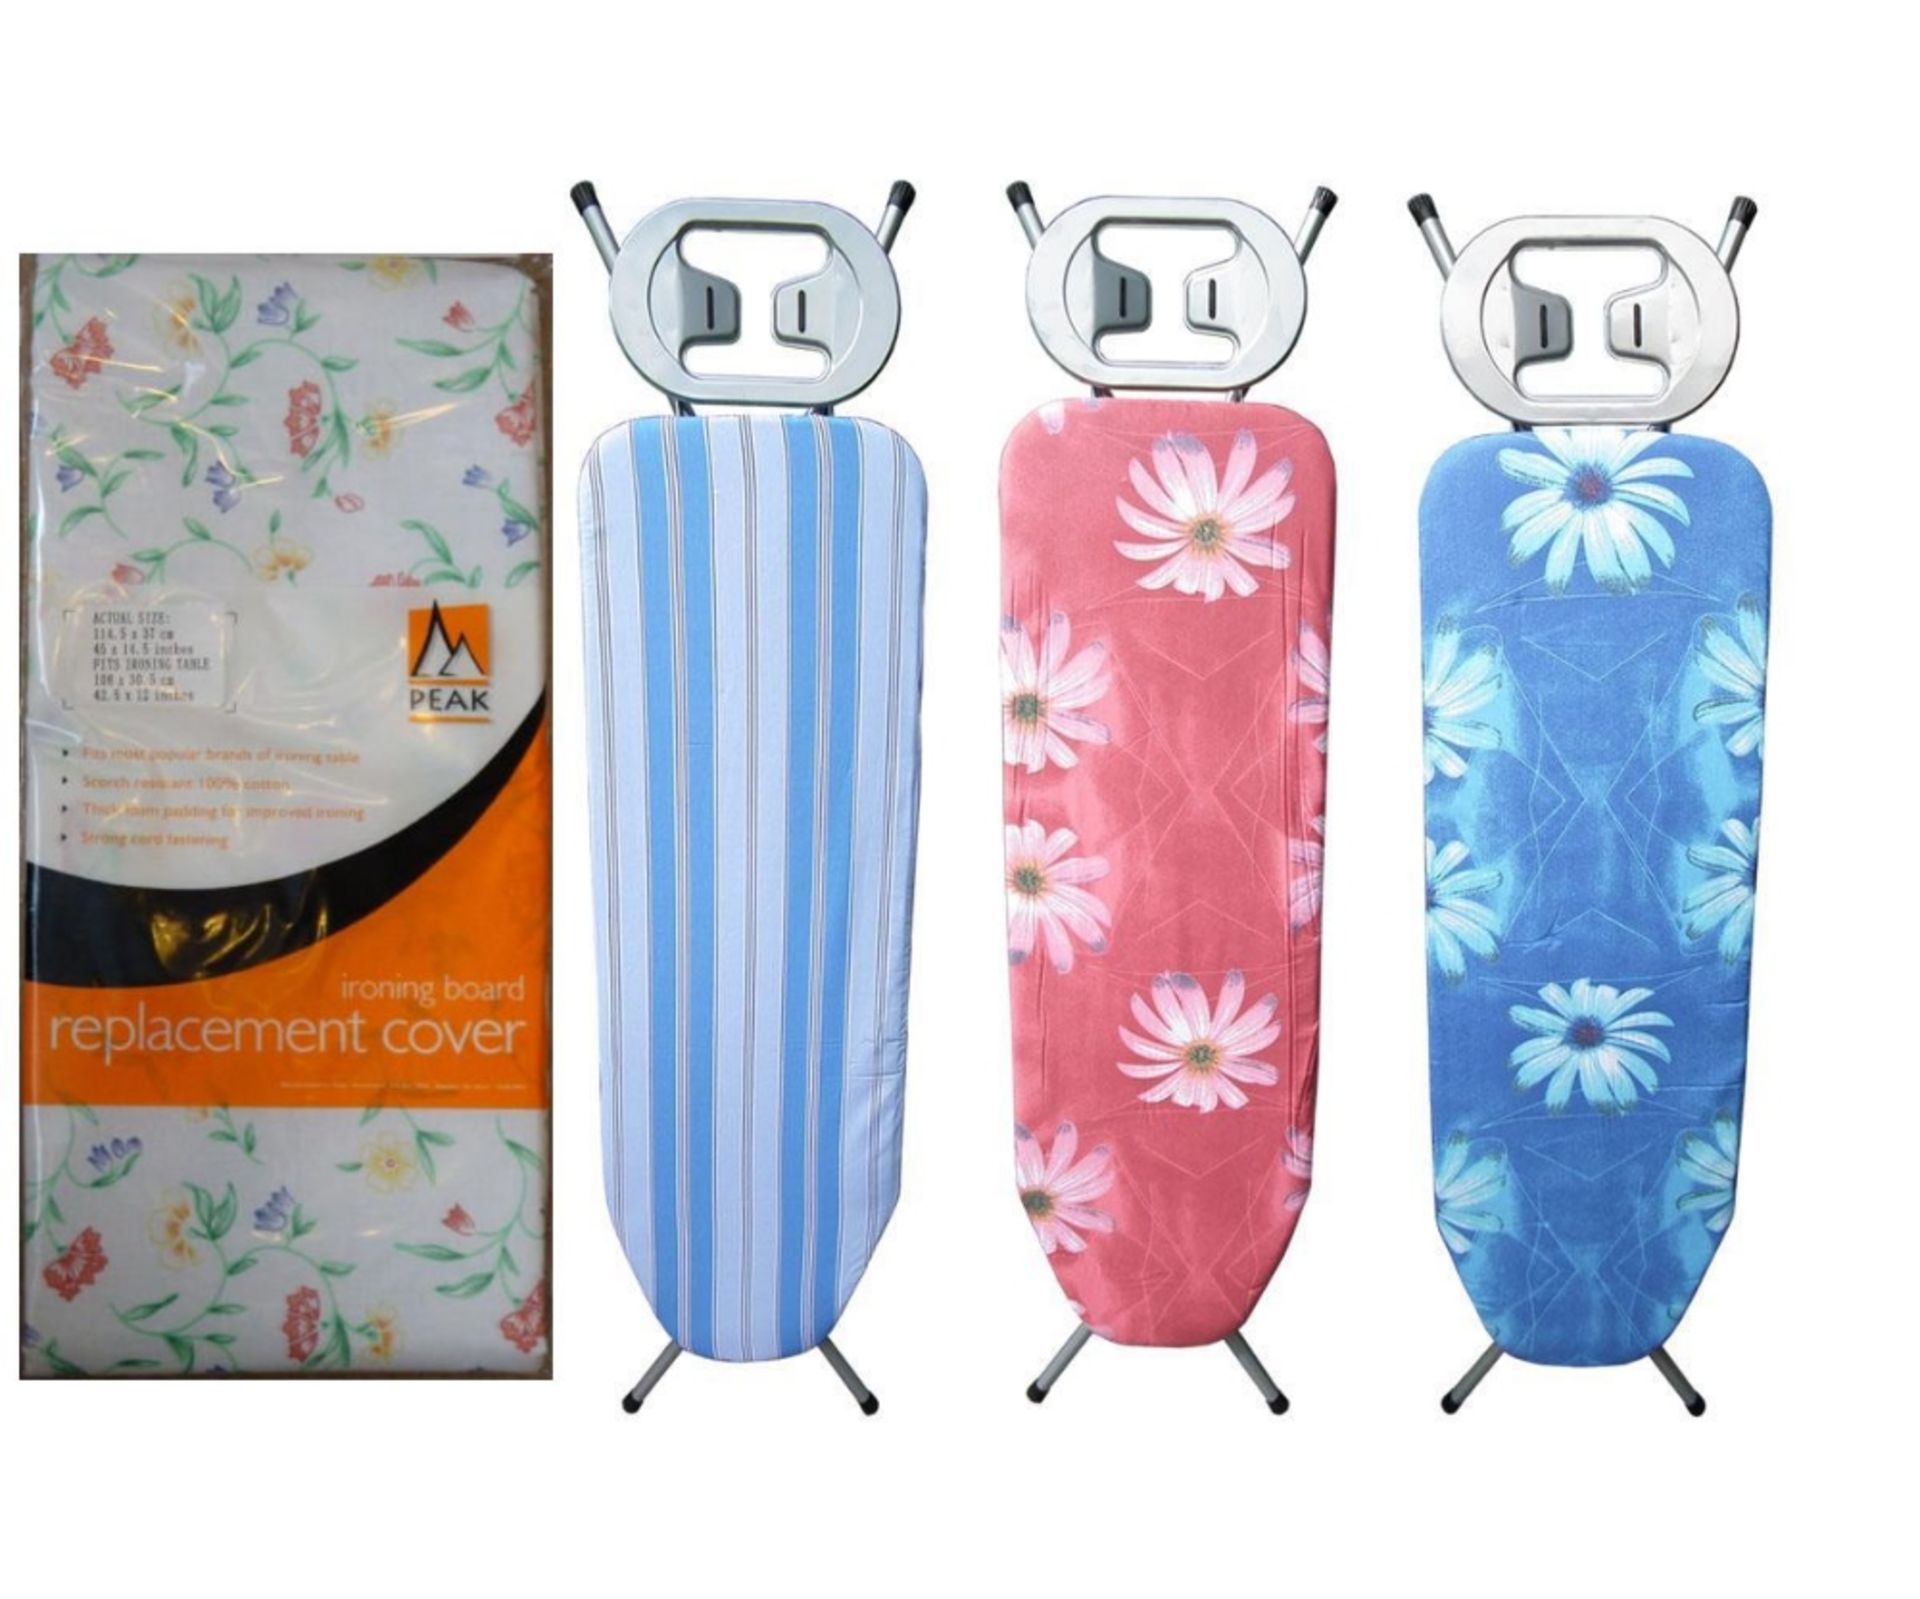 80 x Peak Ironing Board Covers – 1 Style – NO VAT UK Delivery £20